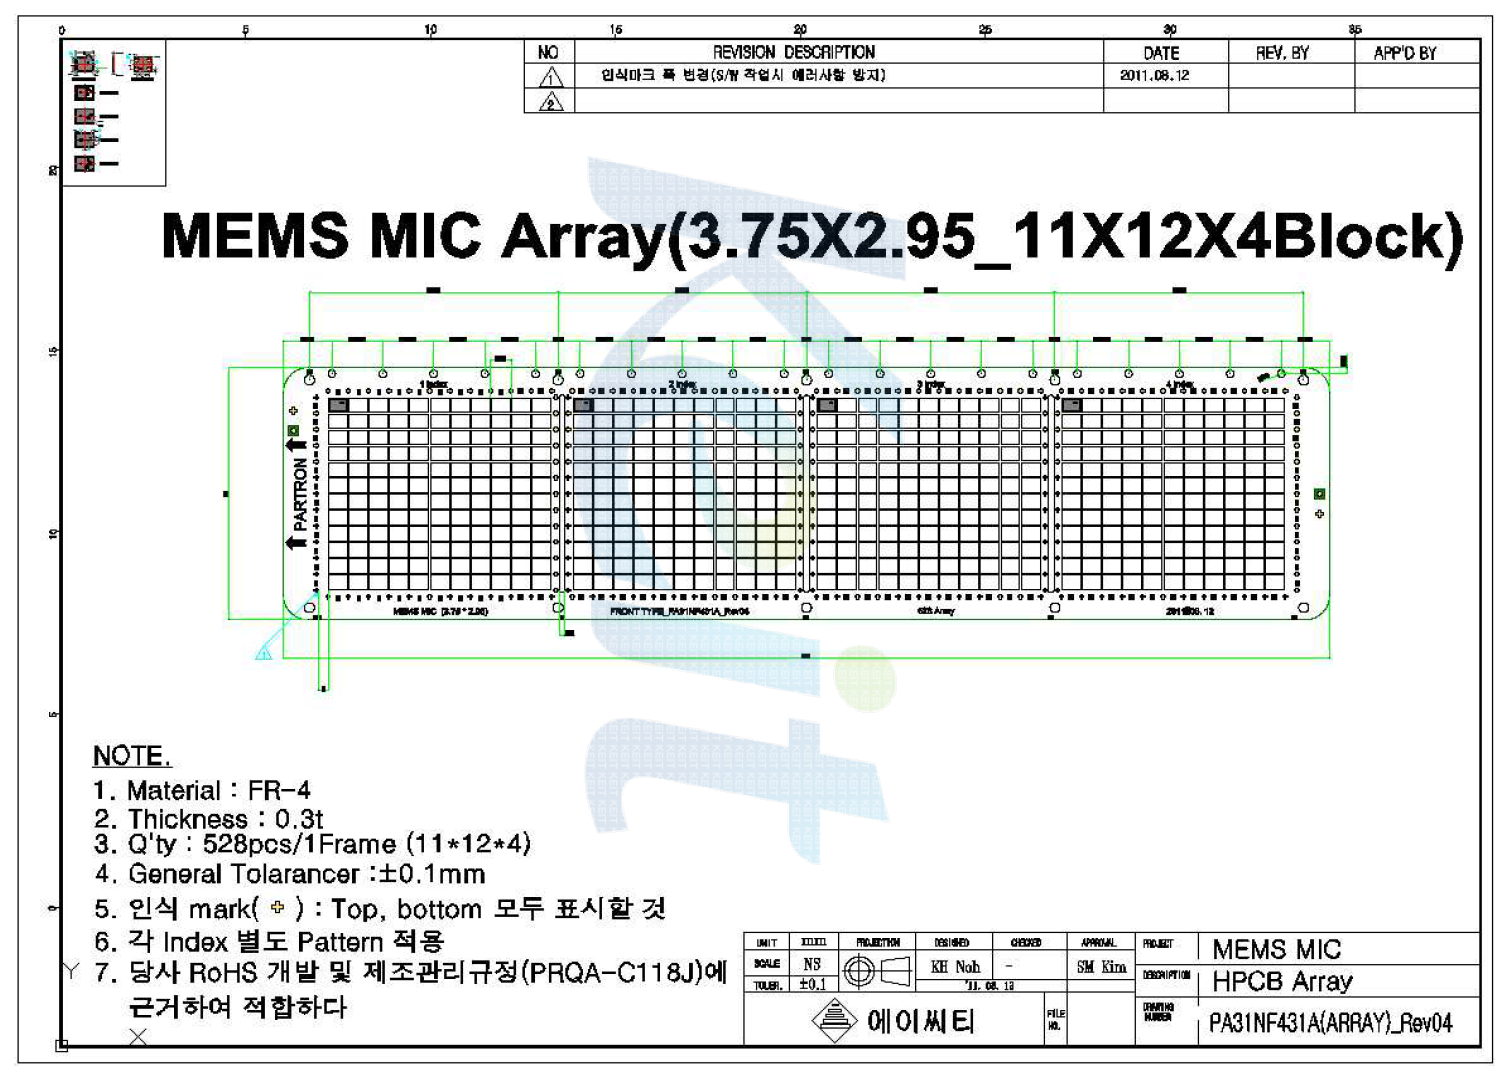 MEMS Microphone PCB Array drawing